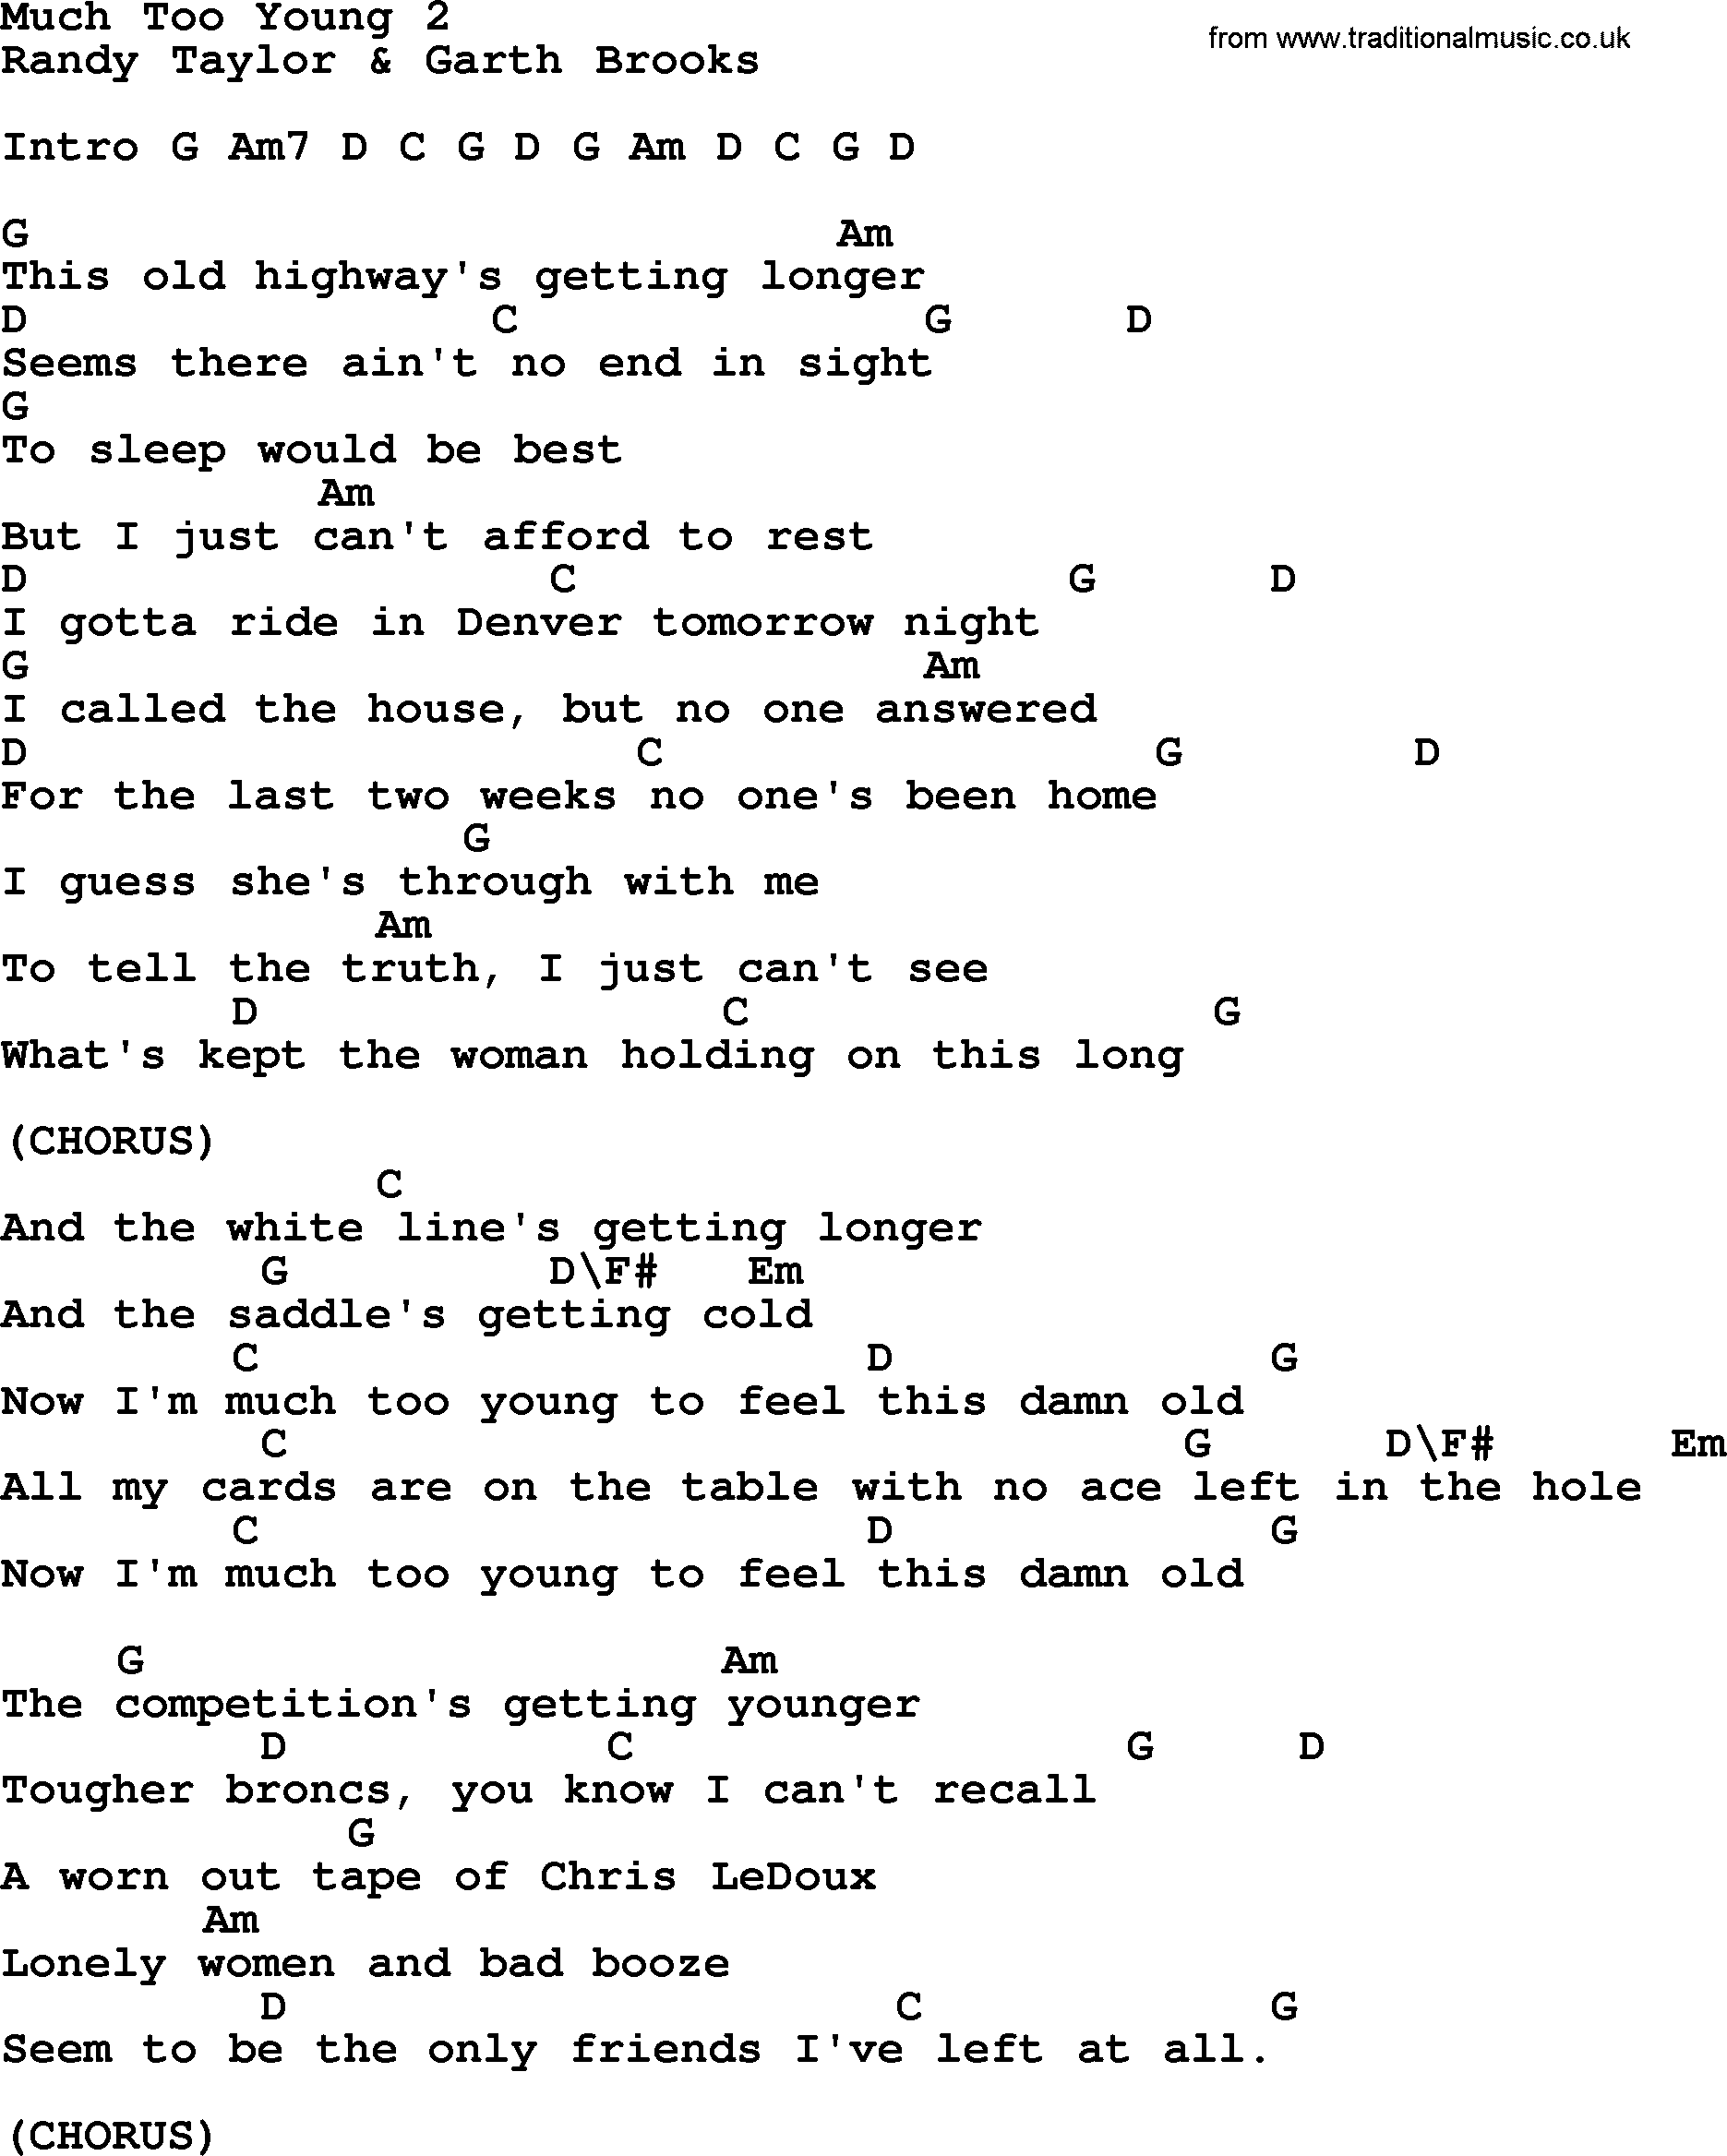 Garth Brooks song: Much Too Young 2, lyrics and chords